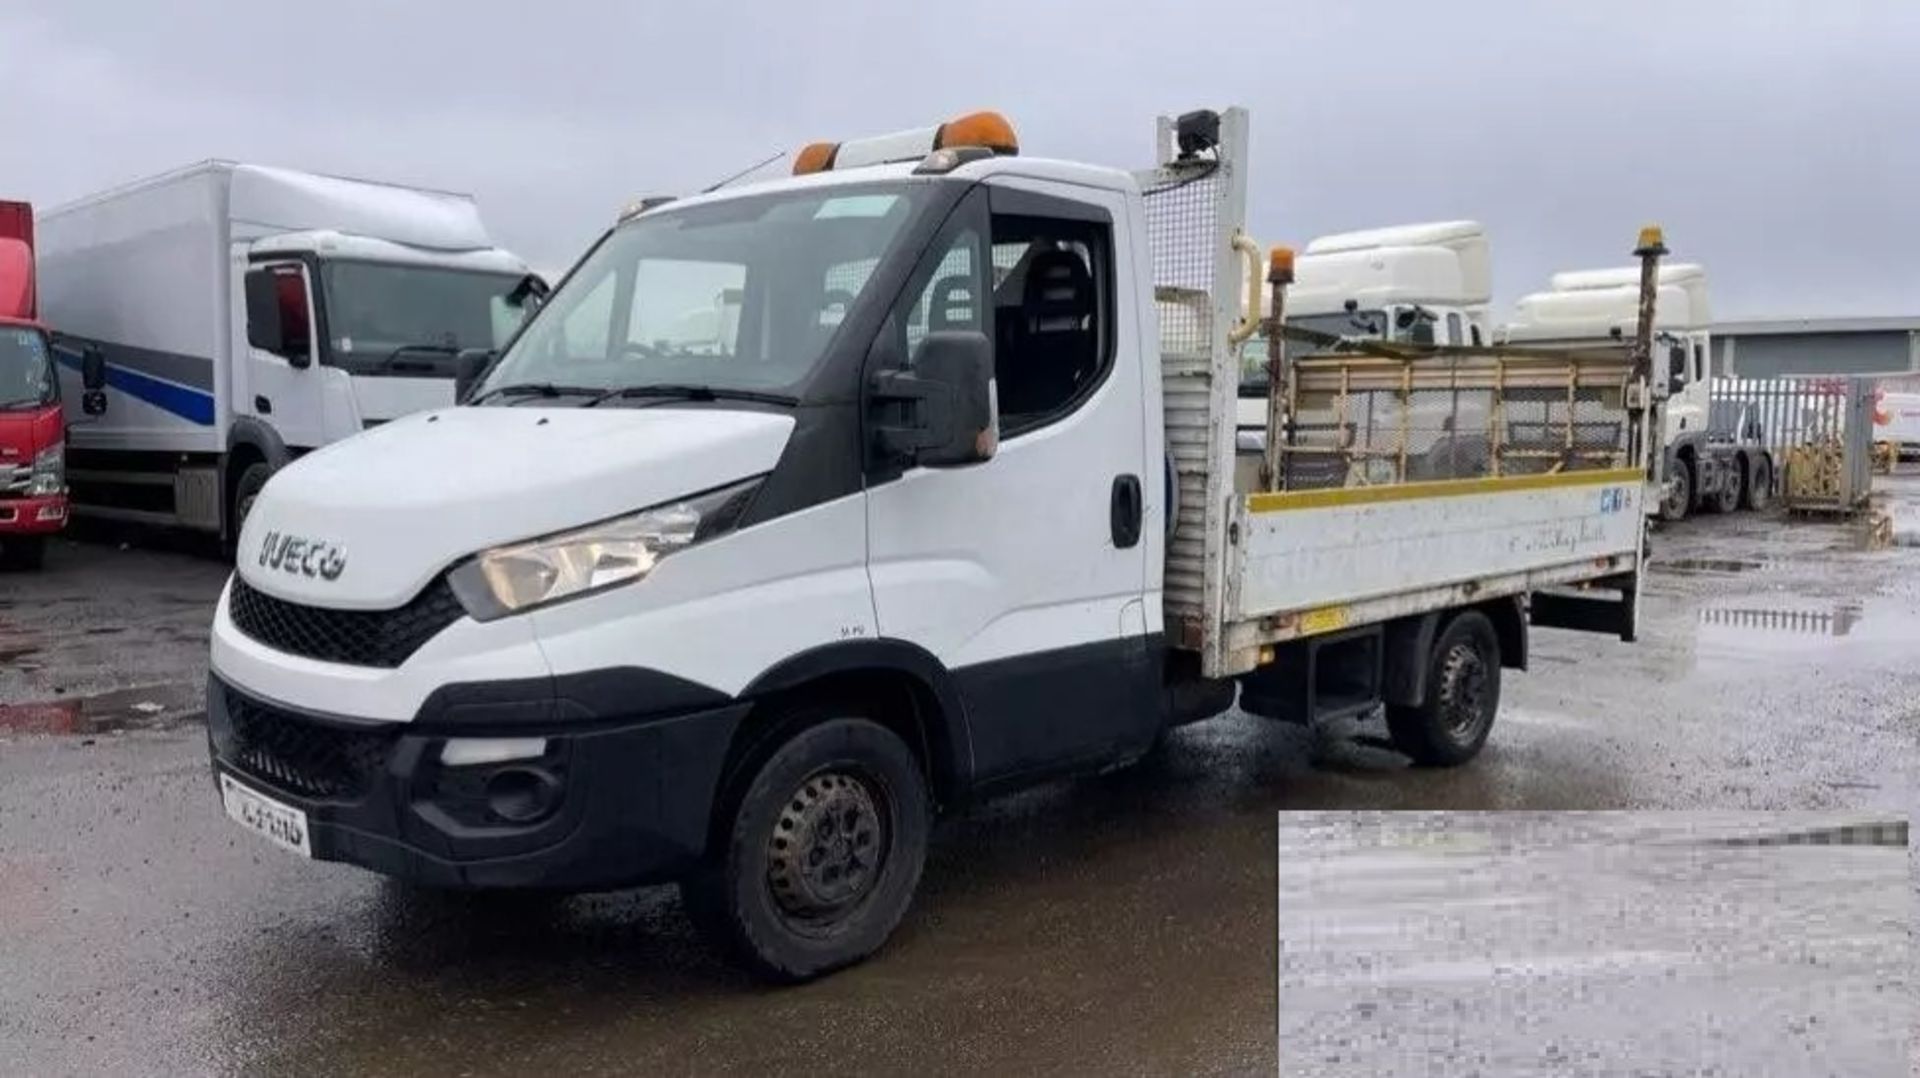 2015 IVECO DAILY DROPSIDE TRUCK - RELIABLE WORKHORSE FOR VERSATILE TRANSPORT SOLUTIONS